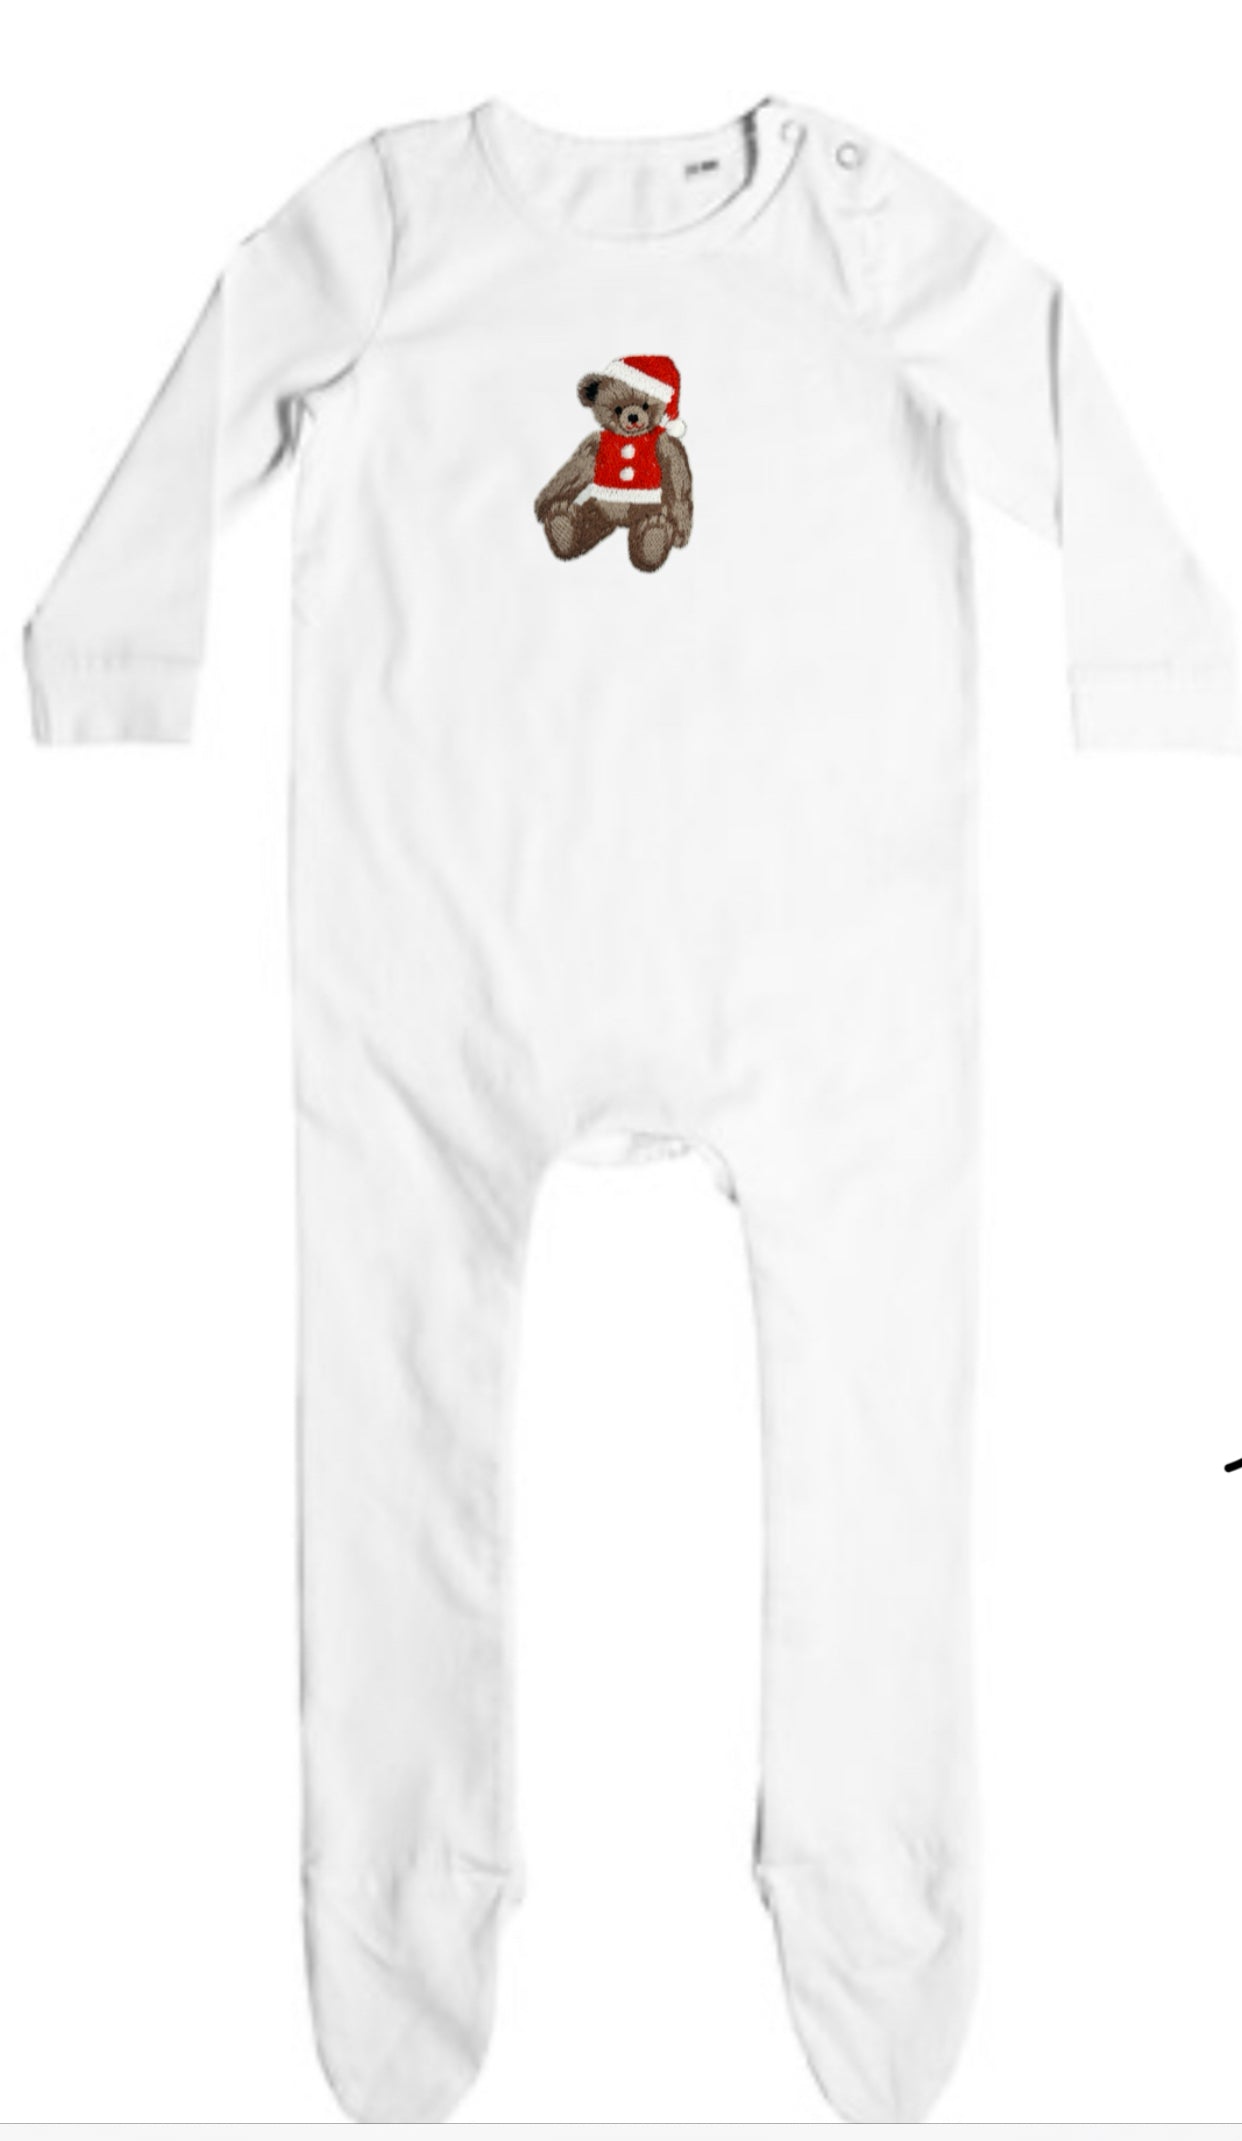 White Sleepsuit with a choice of Design either Teddy, Reindeer or Father Christmas